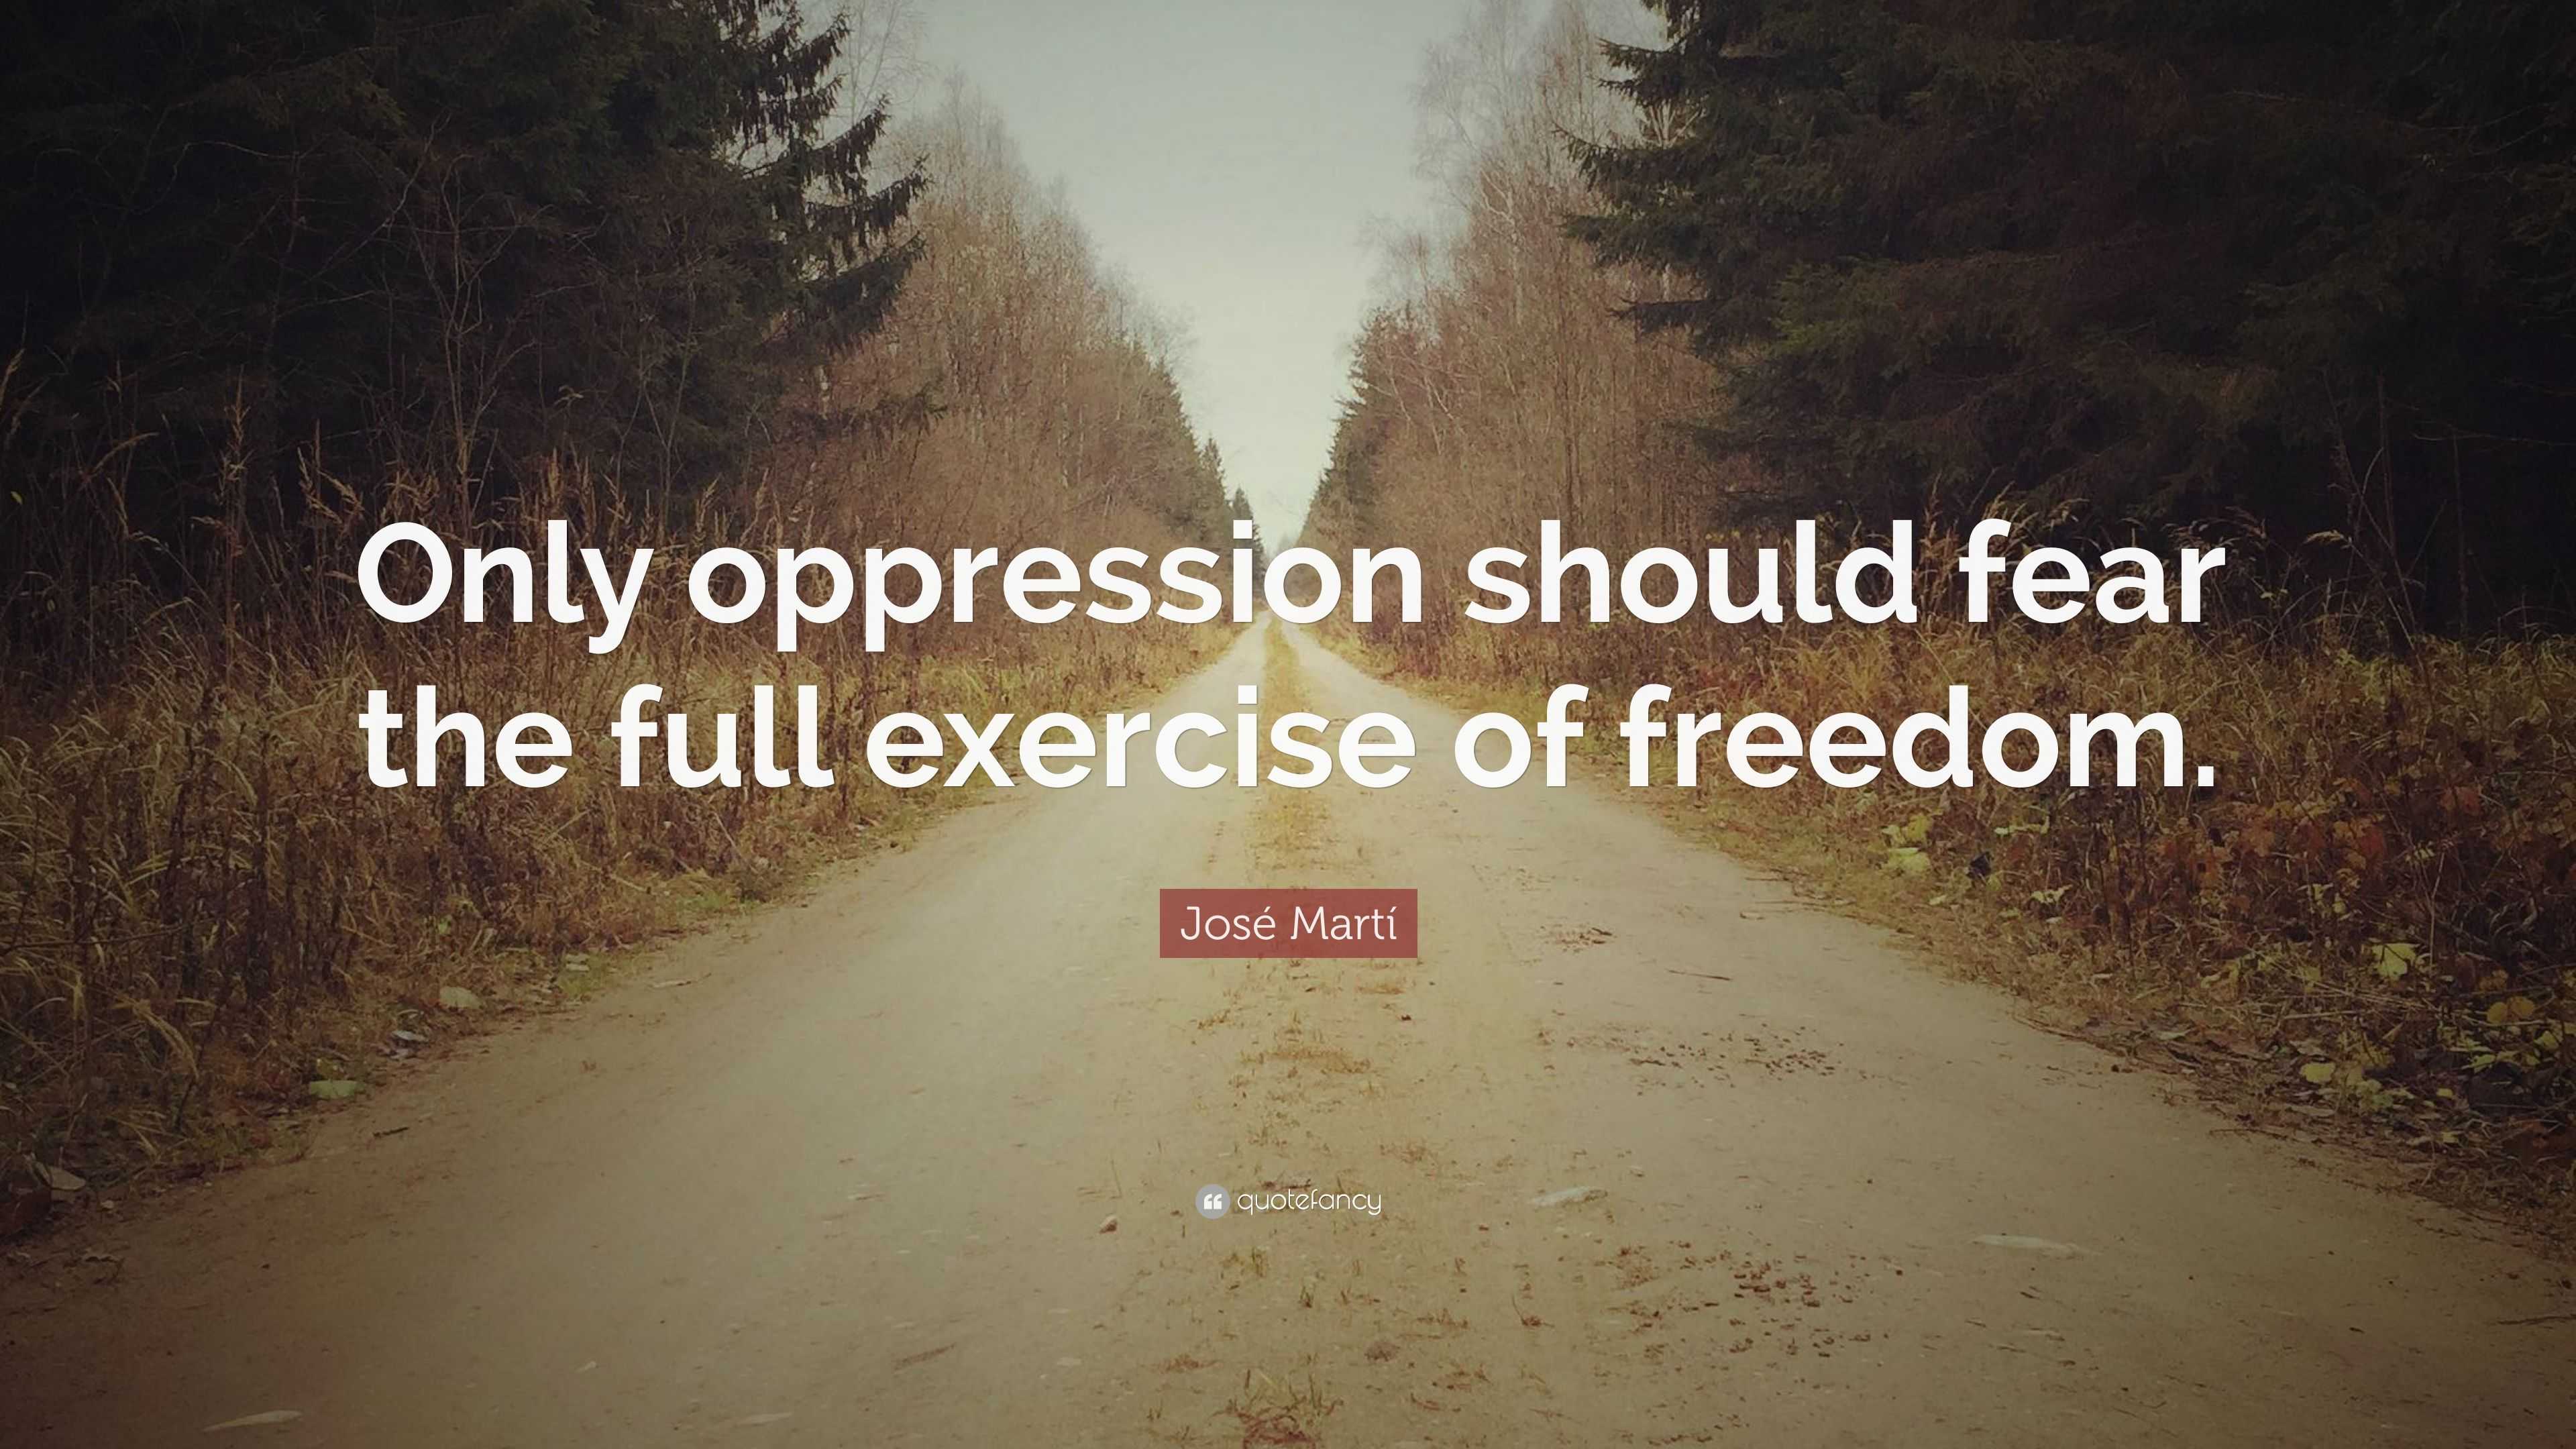 José Martí Quote: “Only oppression should fear the full exercise of ...